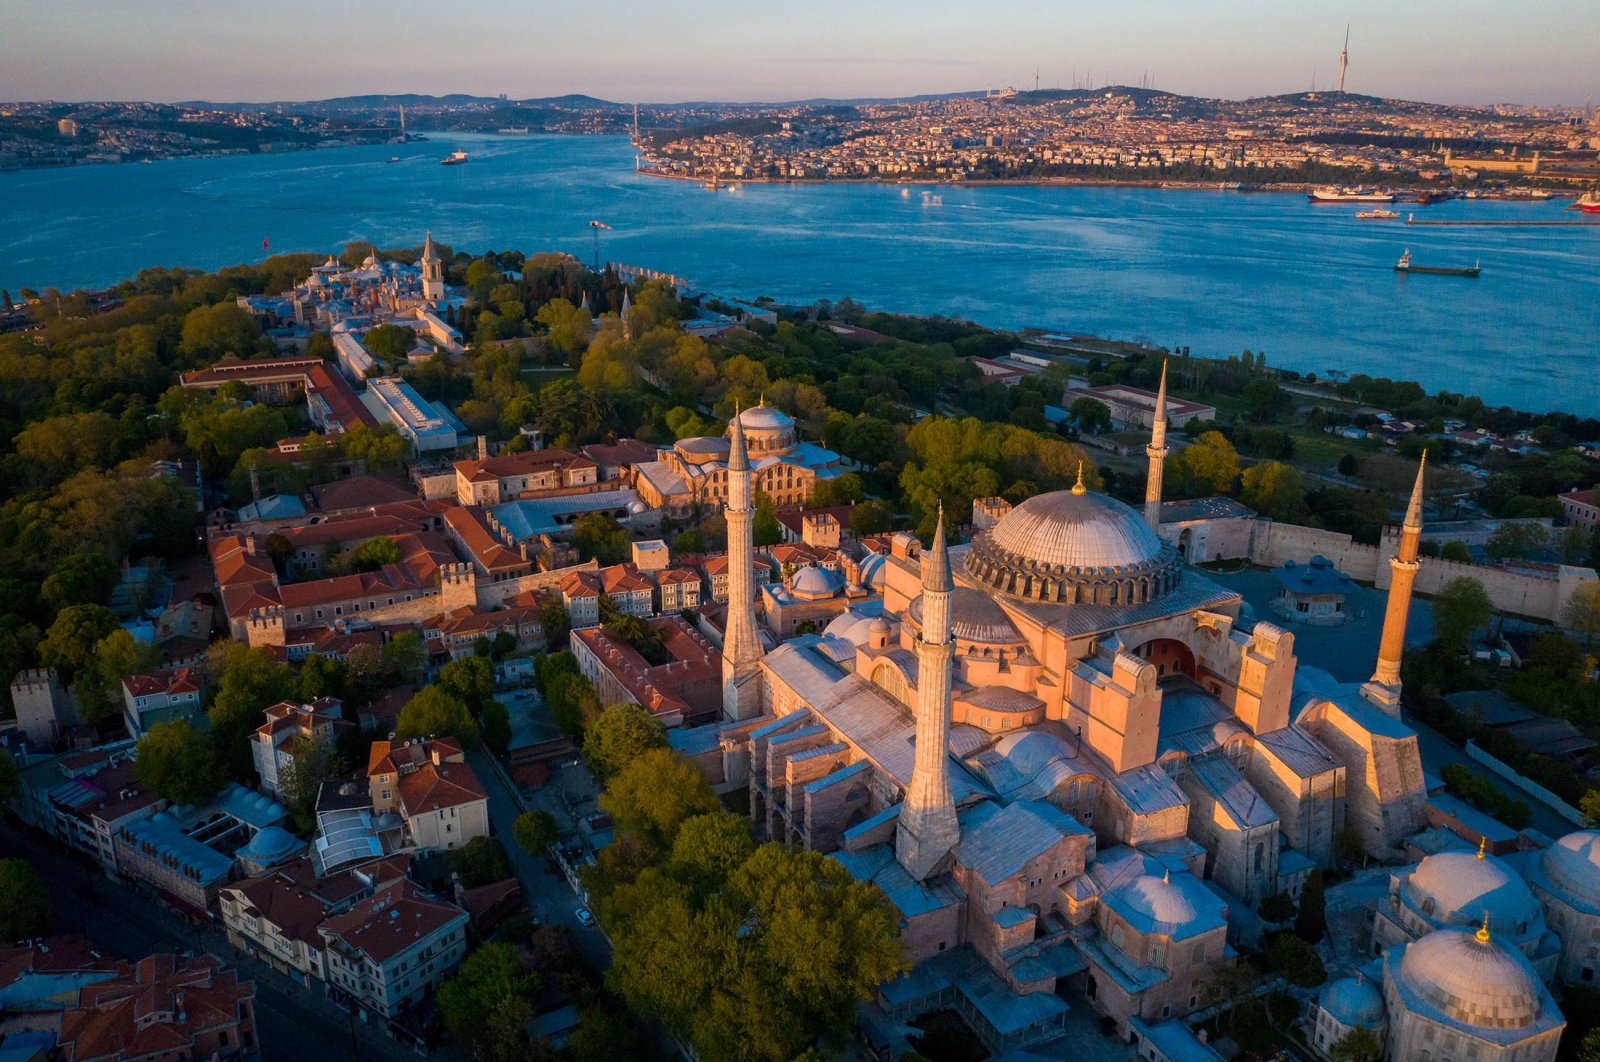 An aerial view of the Hagia Sophia Grand Mosque and the Bosporus, in Istanbul, Türkiye. (Shutterstock Photo)